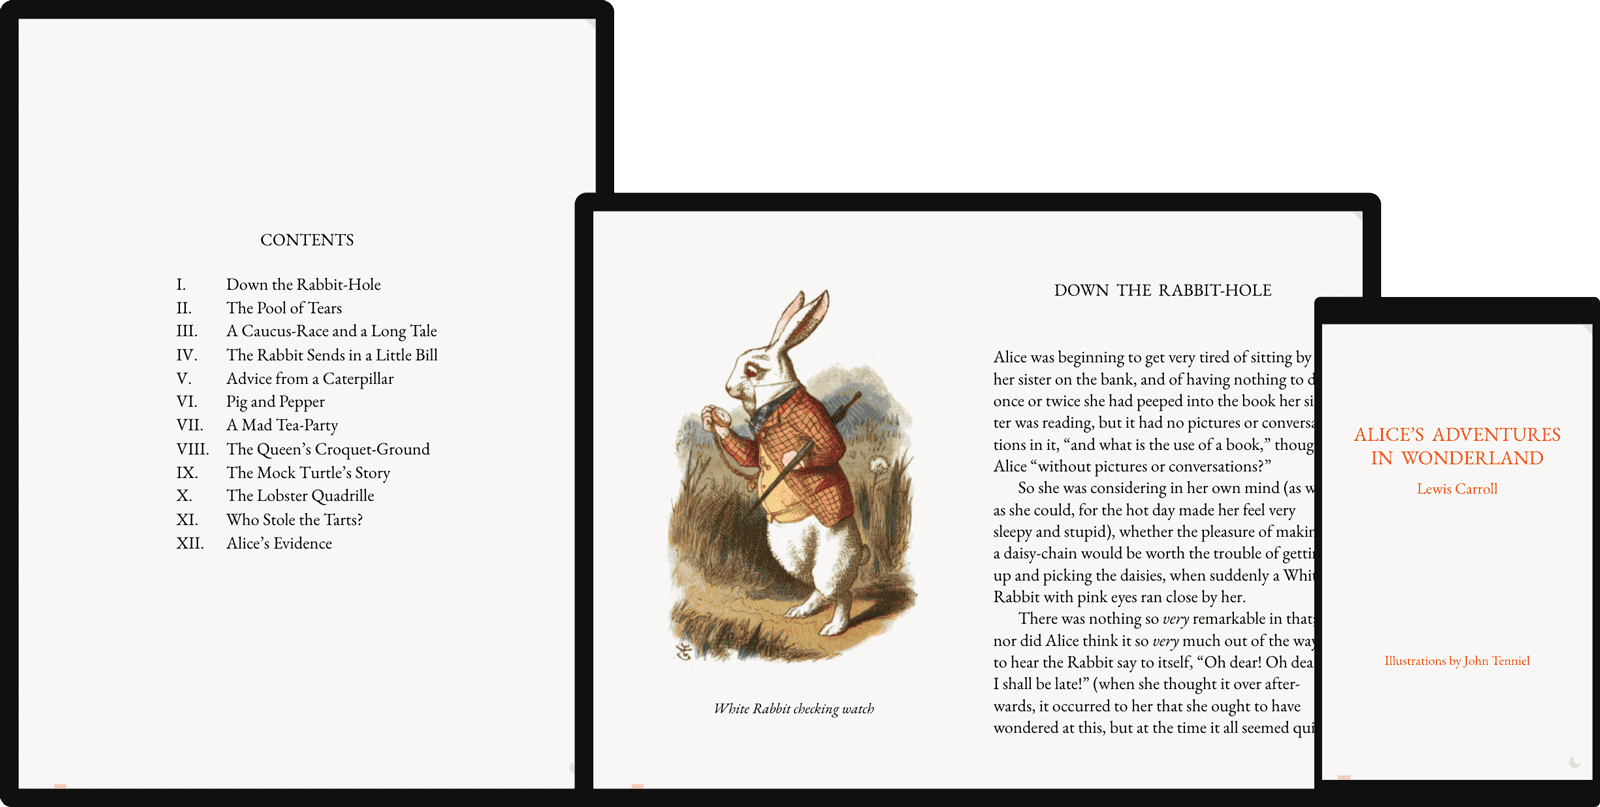 Alice’s Adventures in Wonderland, displayed at different screen sizes and orientations: portrait, landscape, narrow (mobile)